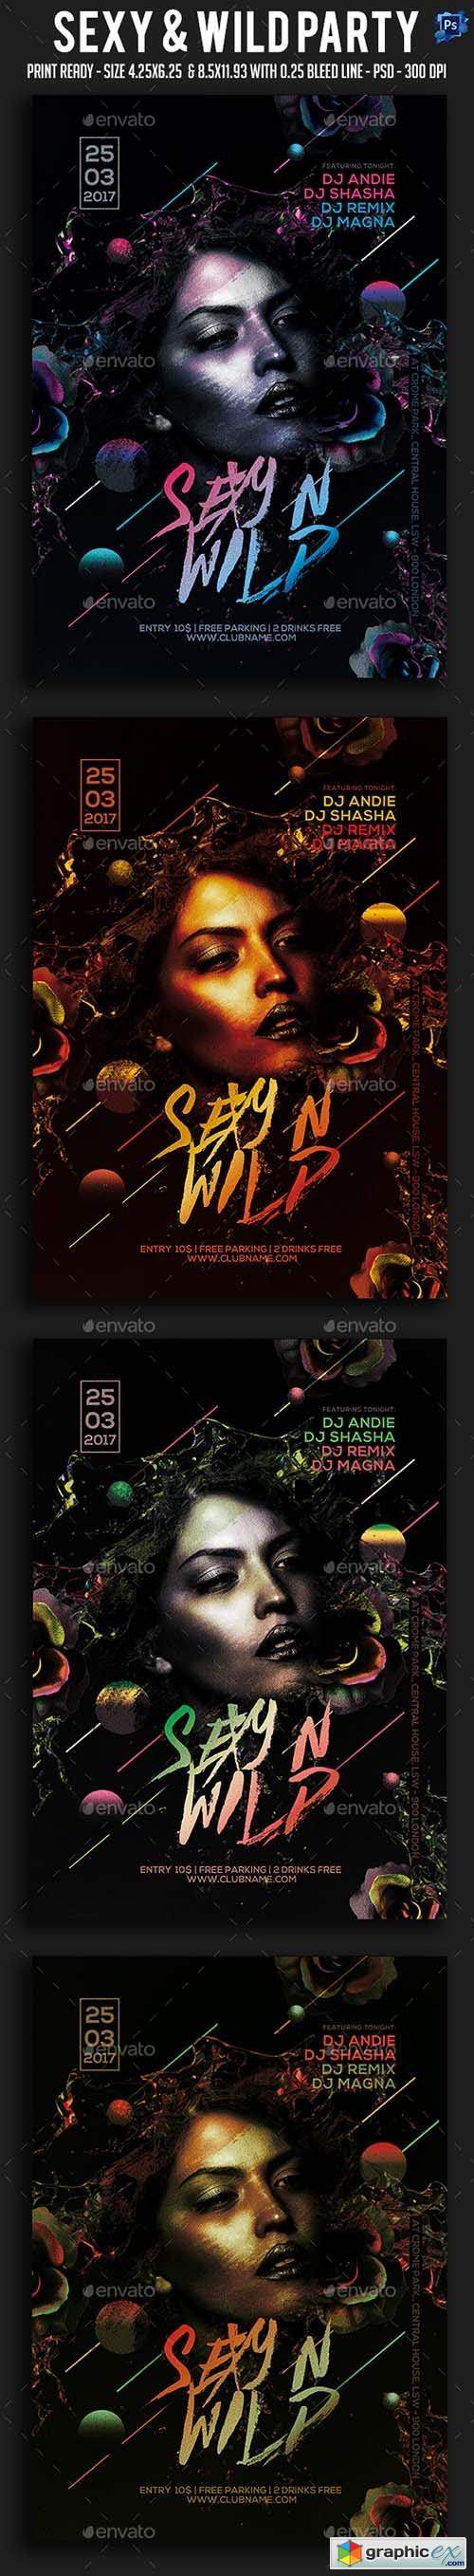 Sexy & Wild Party Flyer